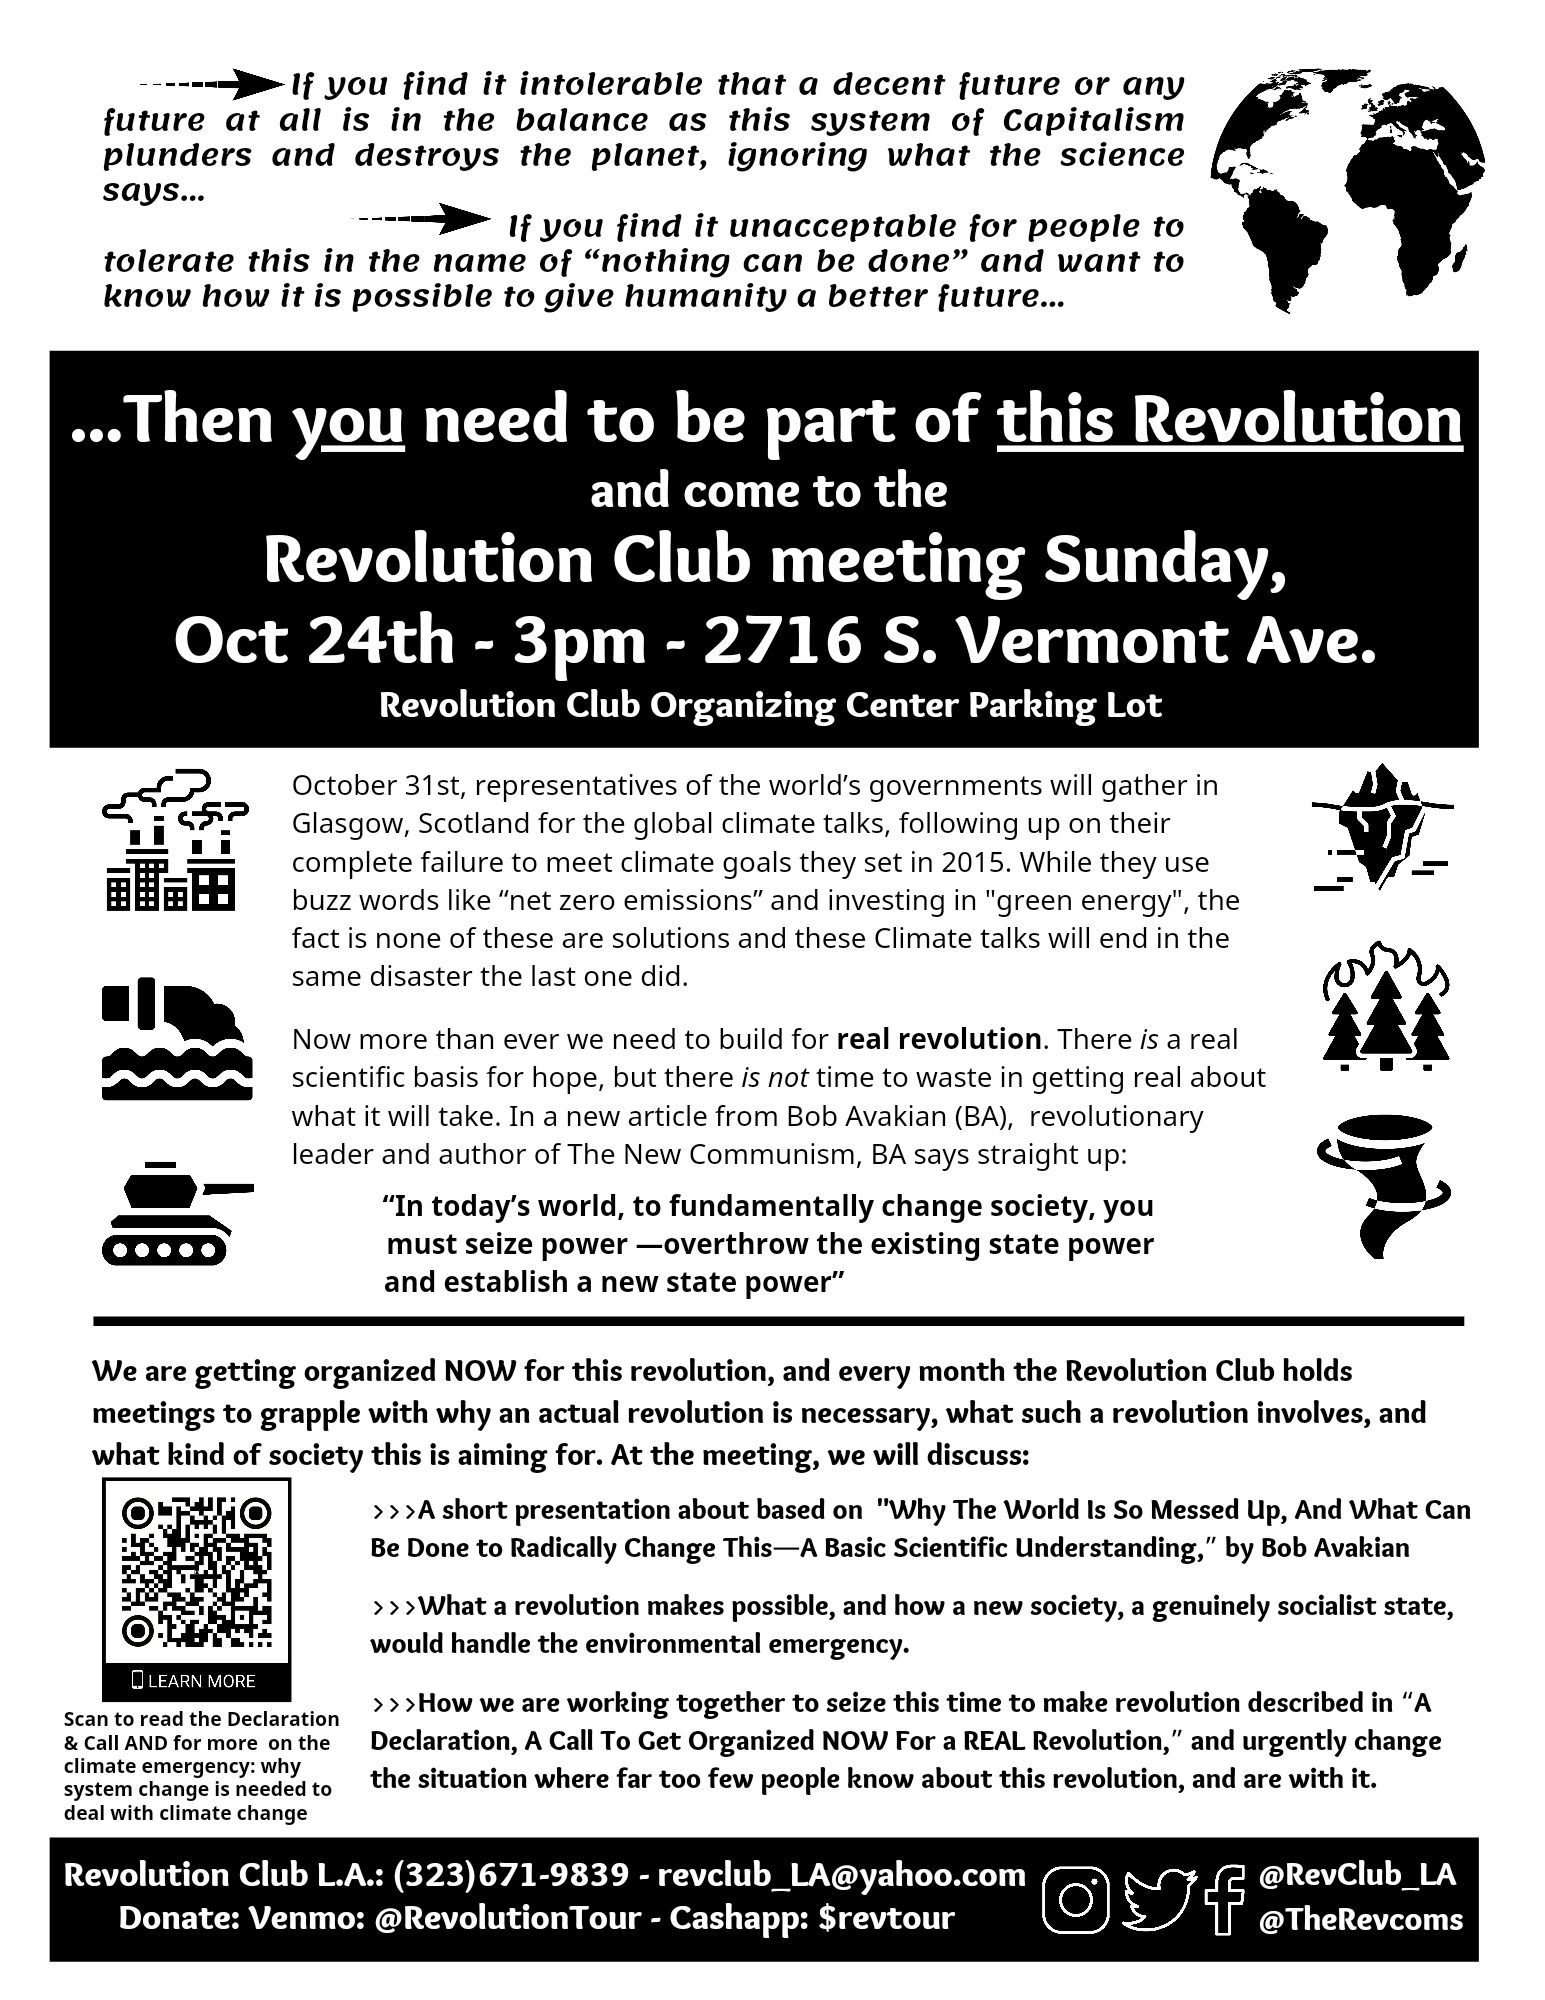 You Need to Be Part of This Revolution - LA Version